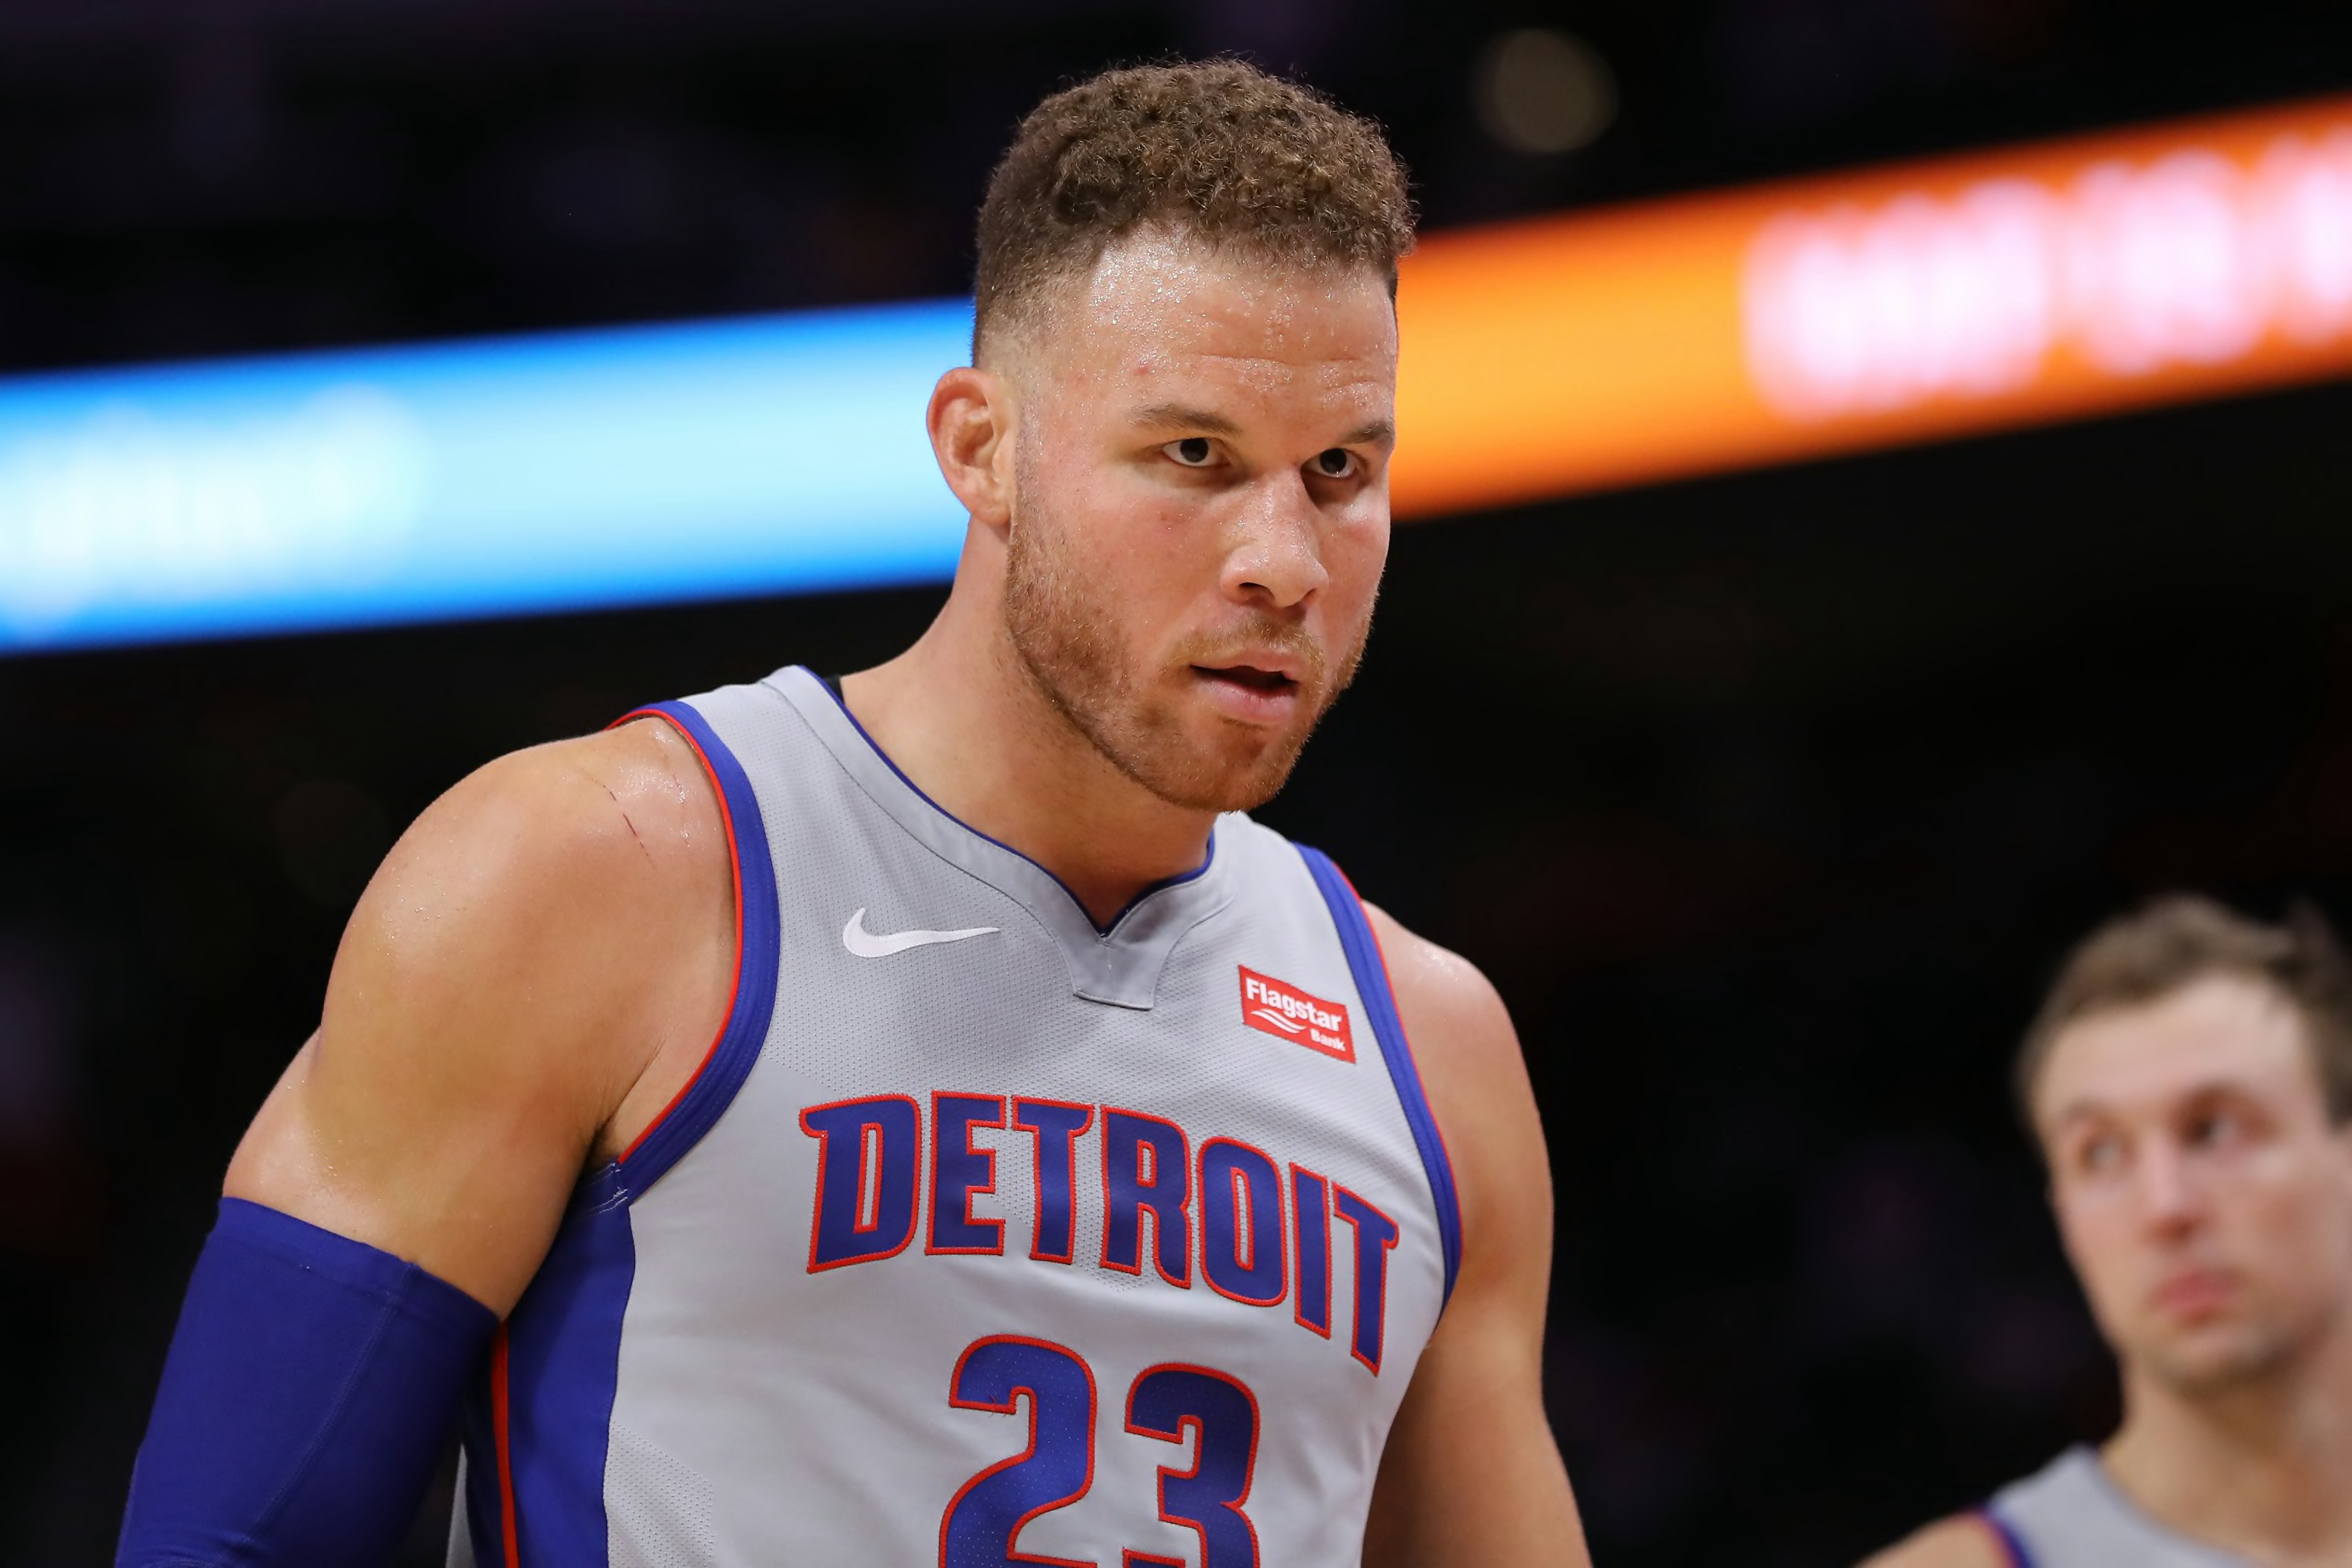 Pistons' Blake Griffin during his time in Detroit